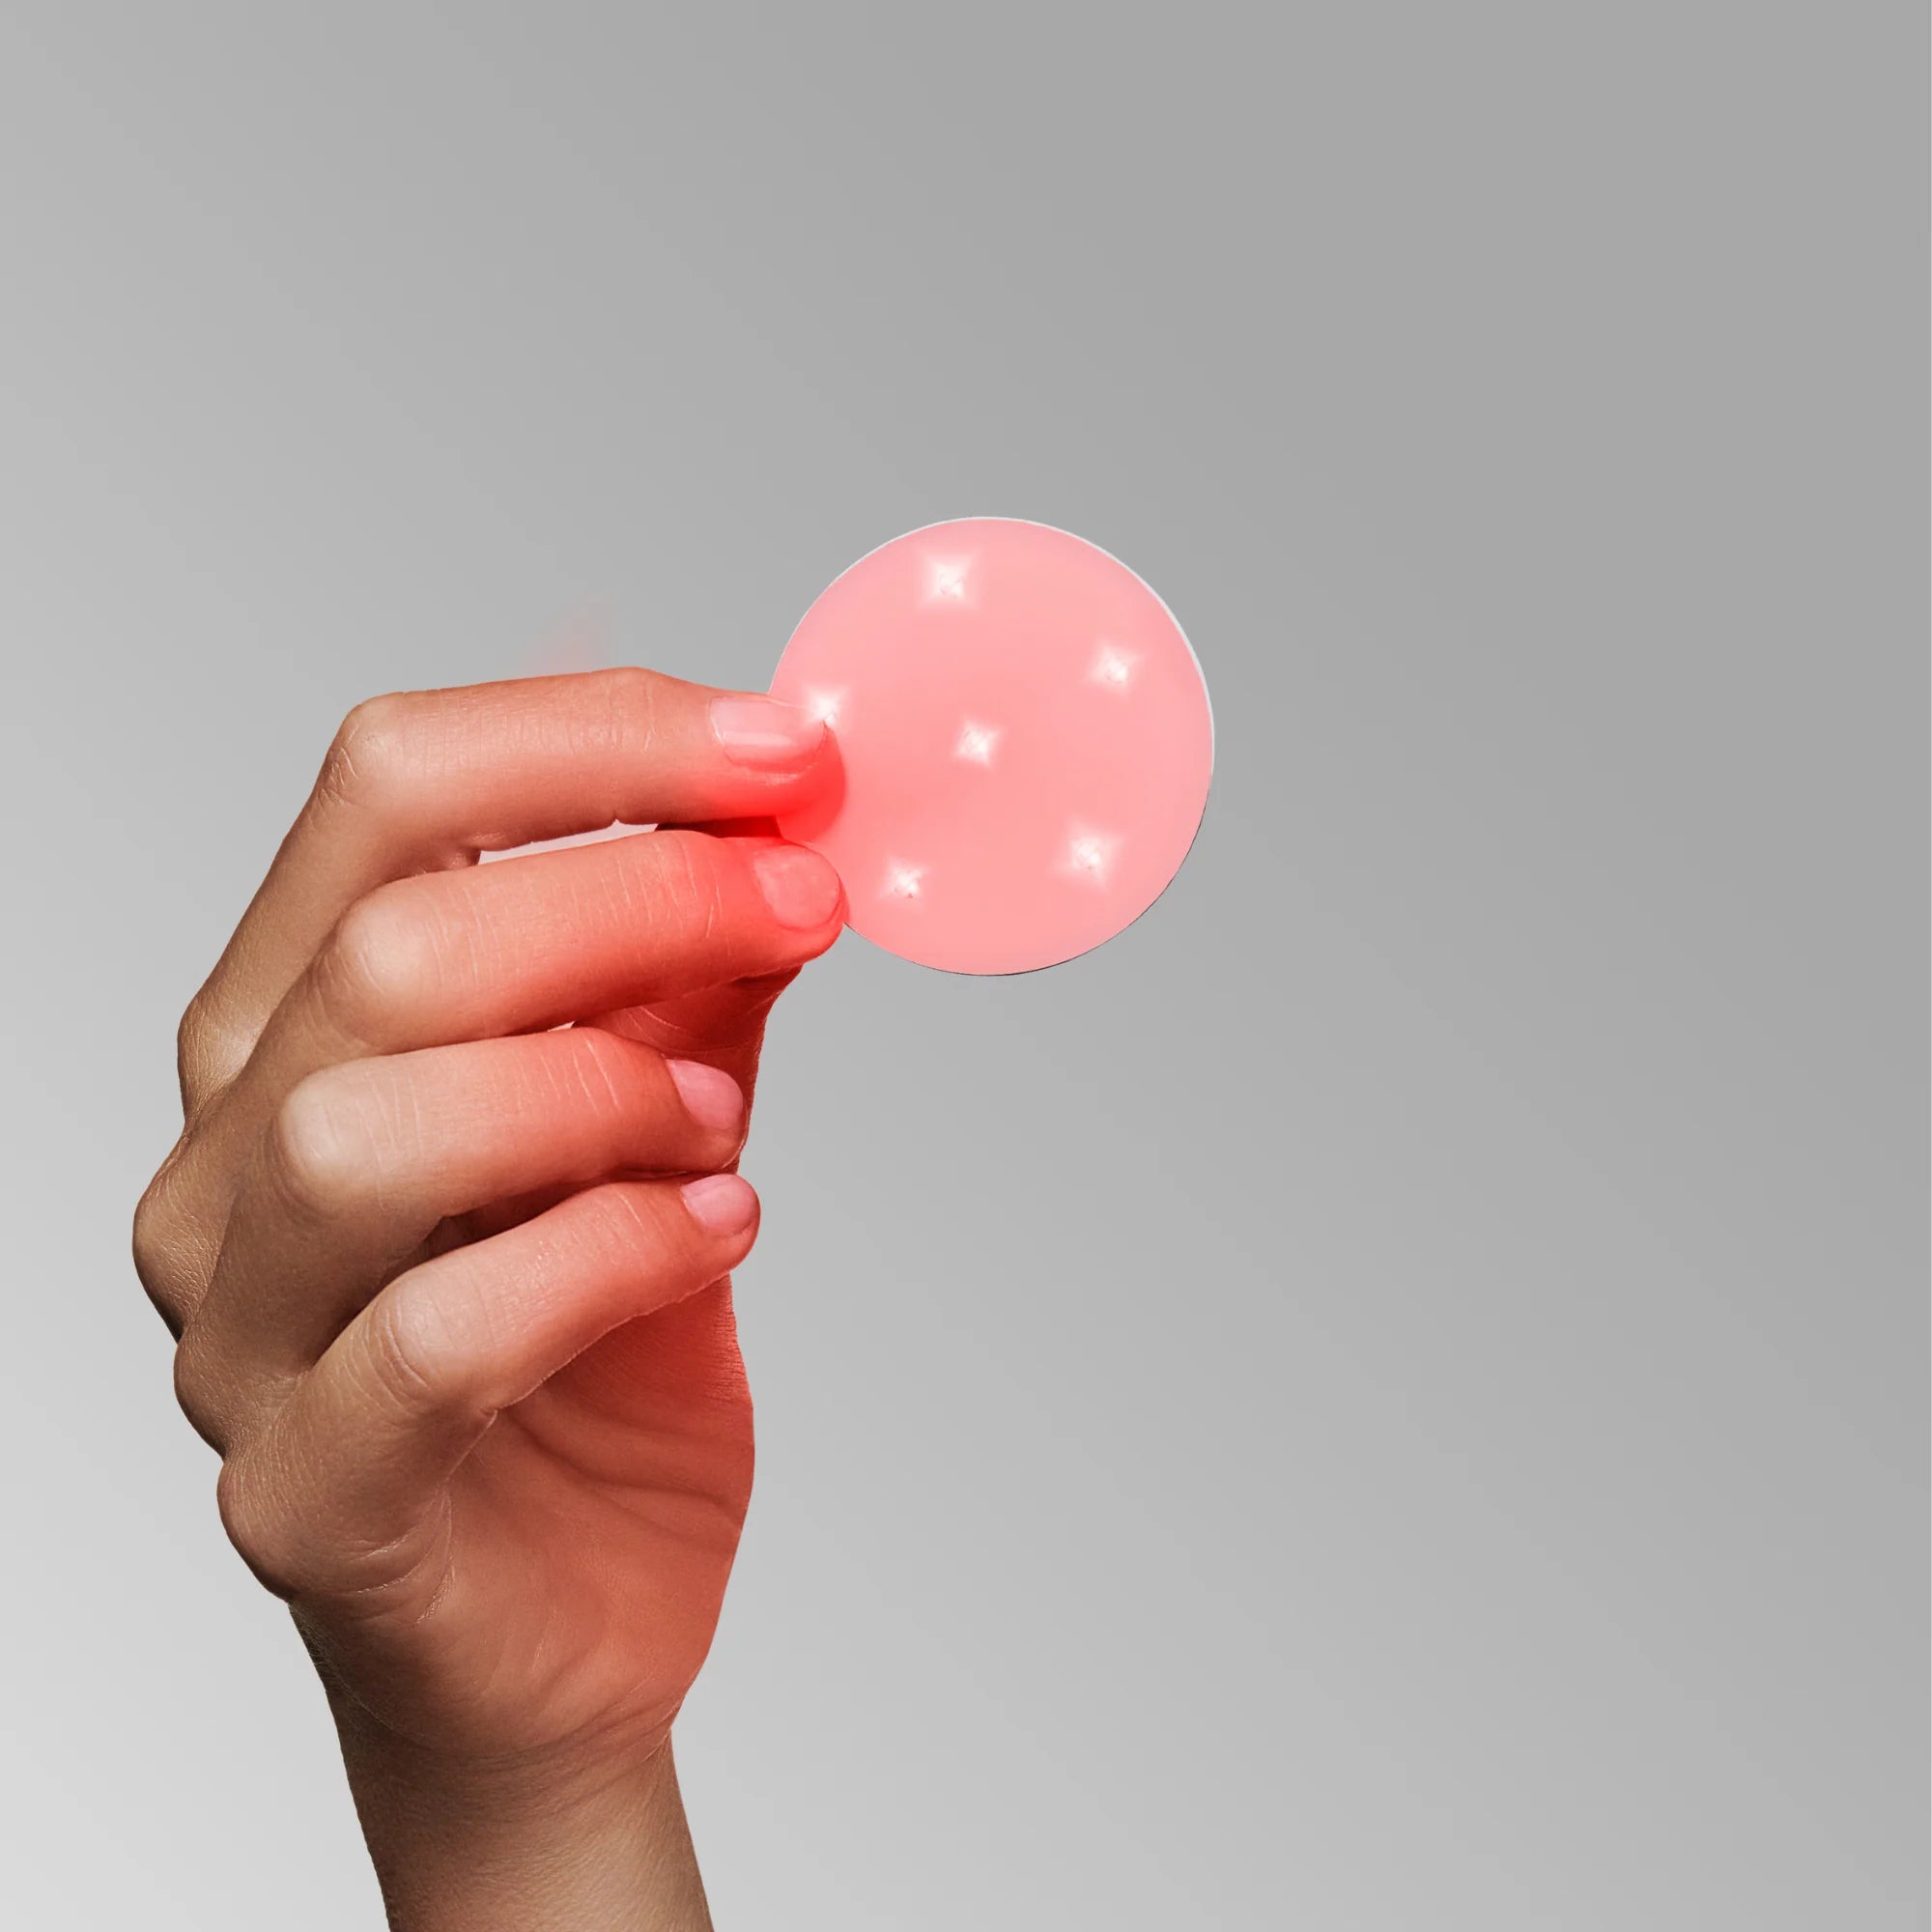 the omnilux mini skin corrector being held in the hand shows the red LED and Infrarard lights